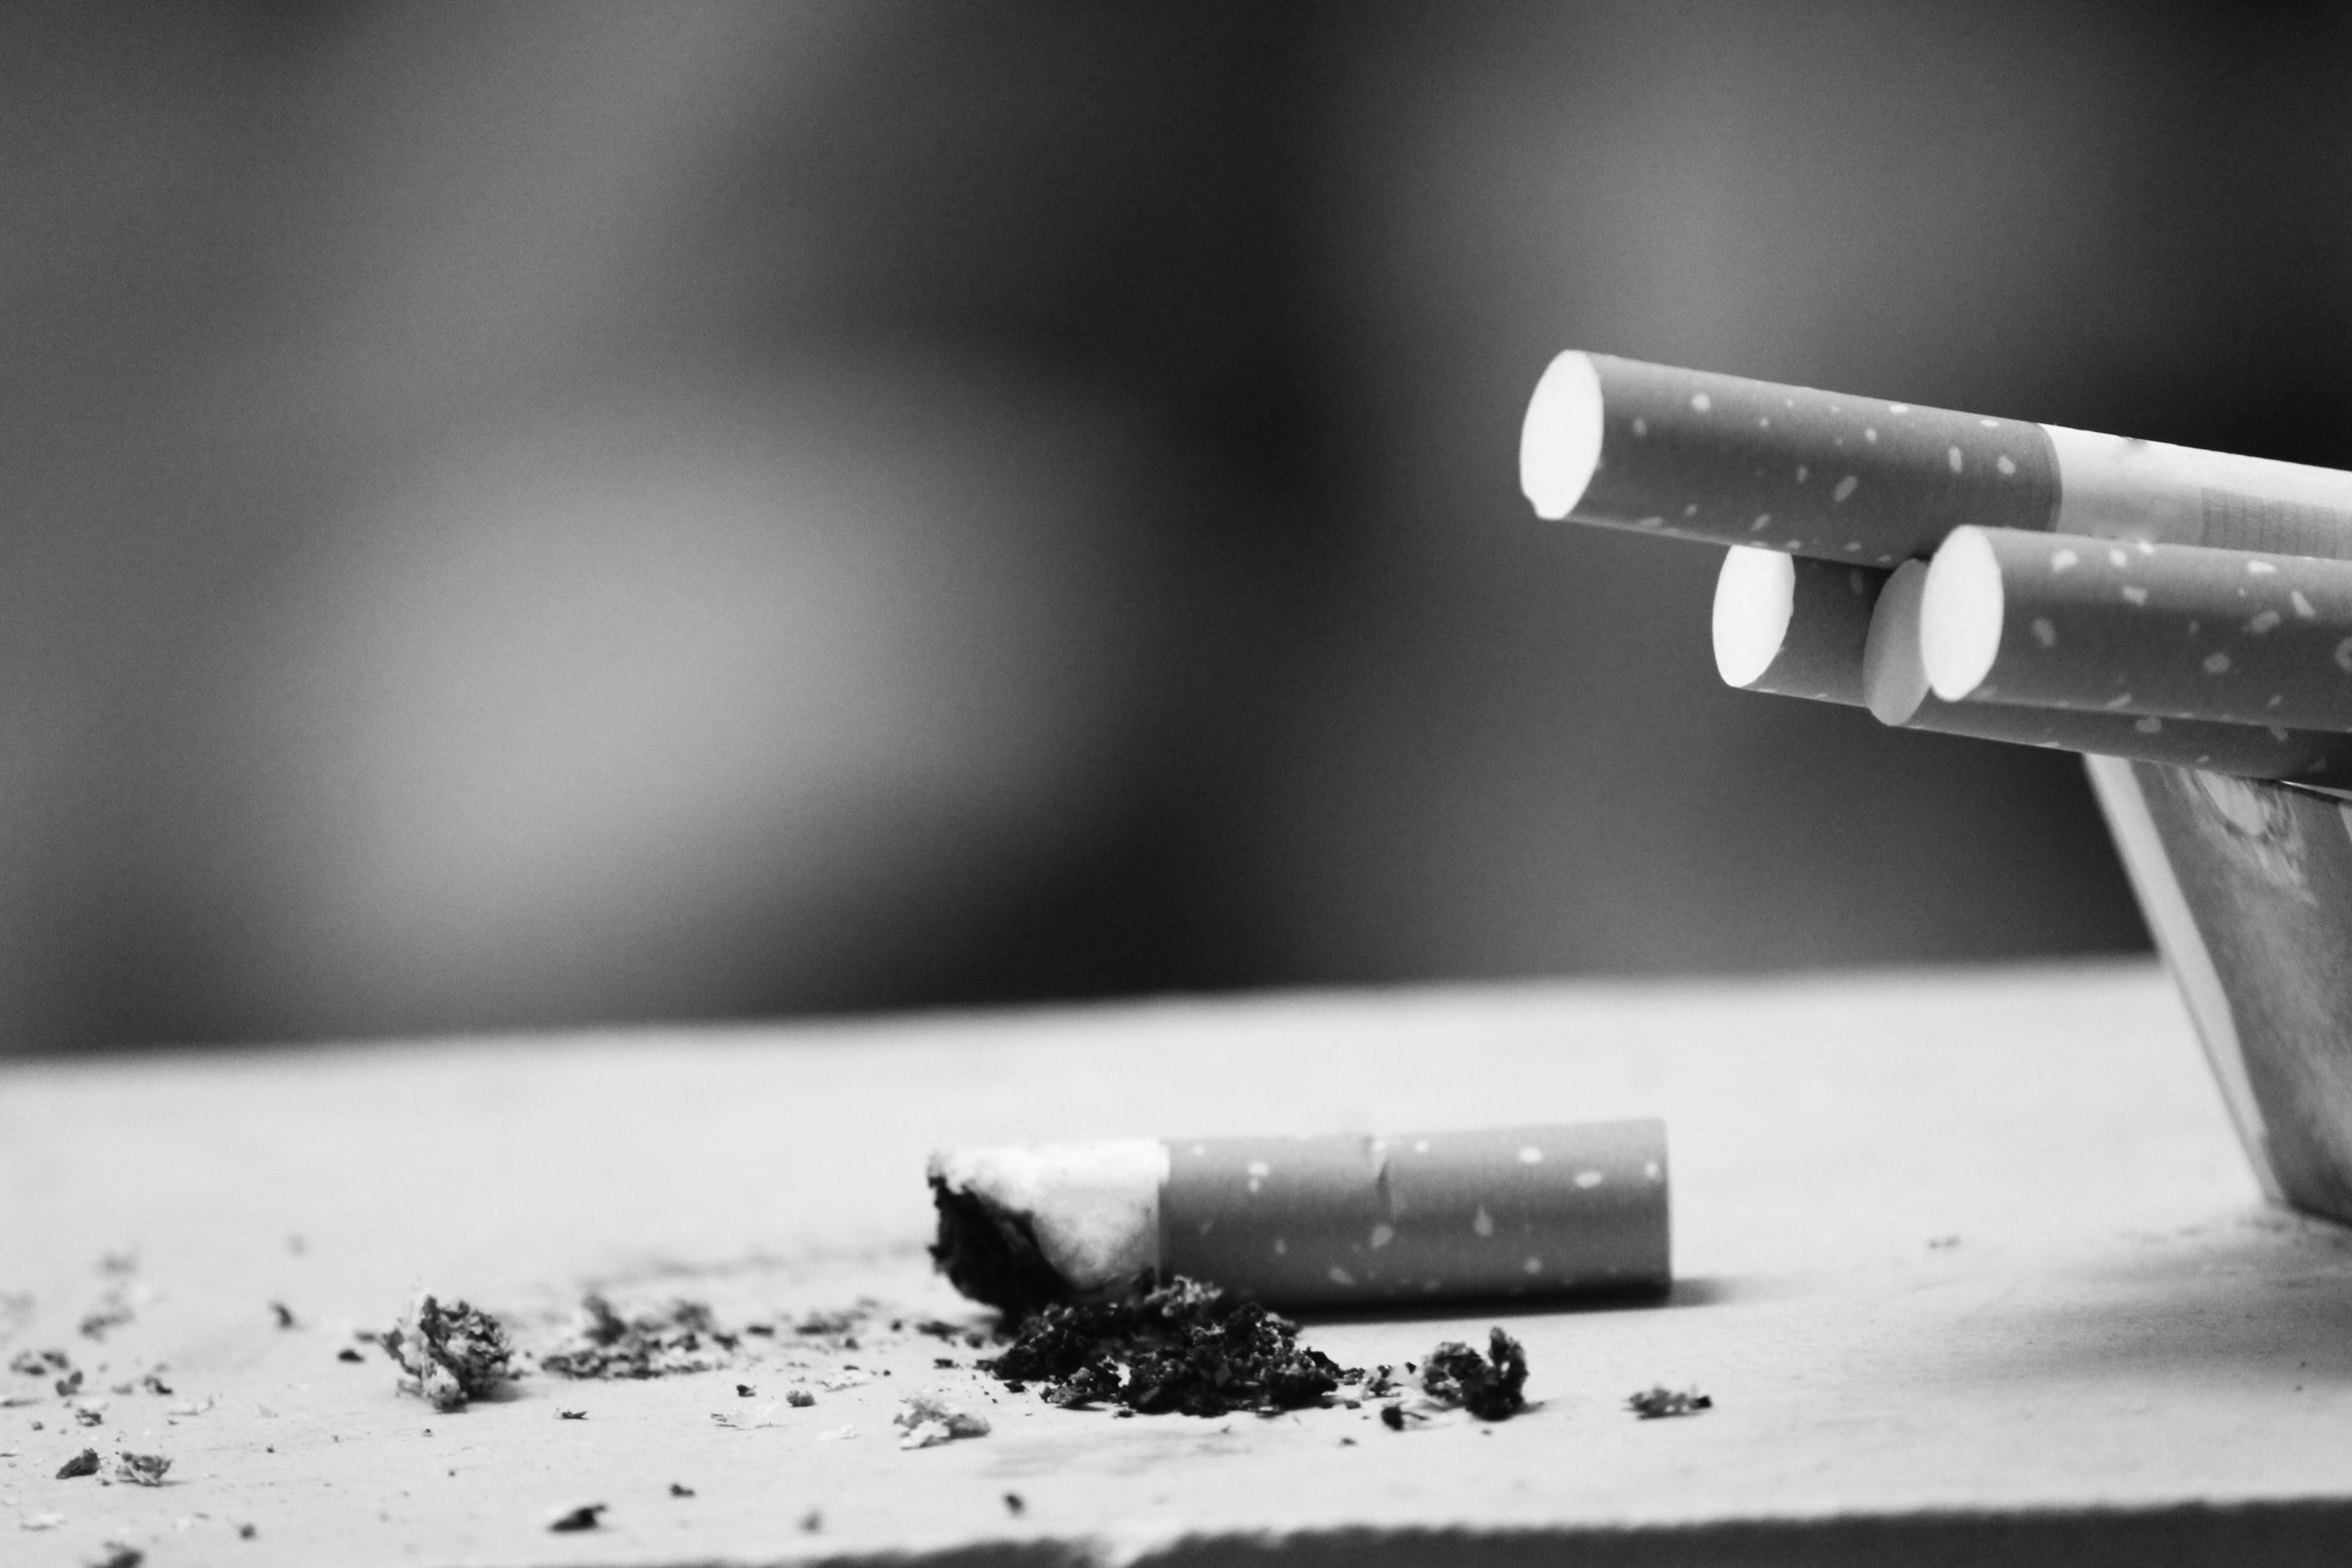 Smoking gun: ATF agents busted in cigarette sting